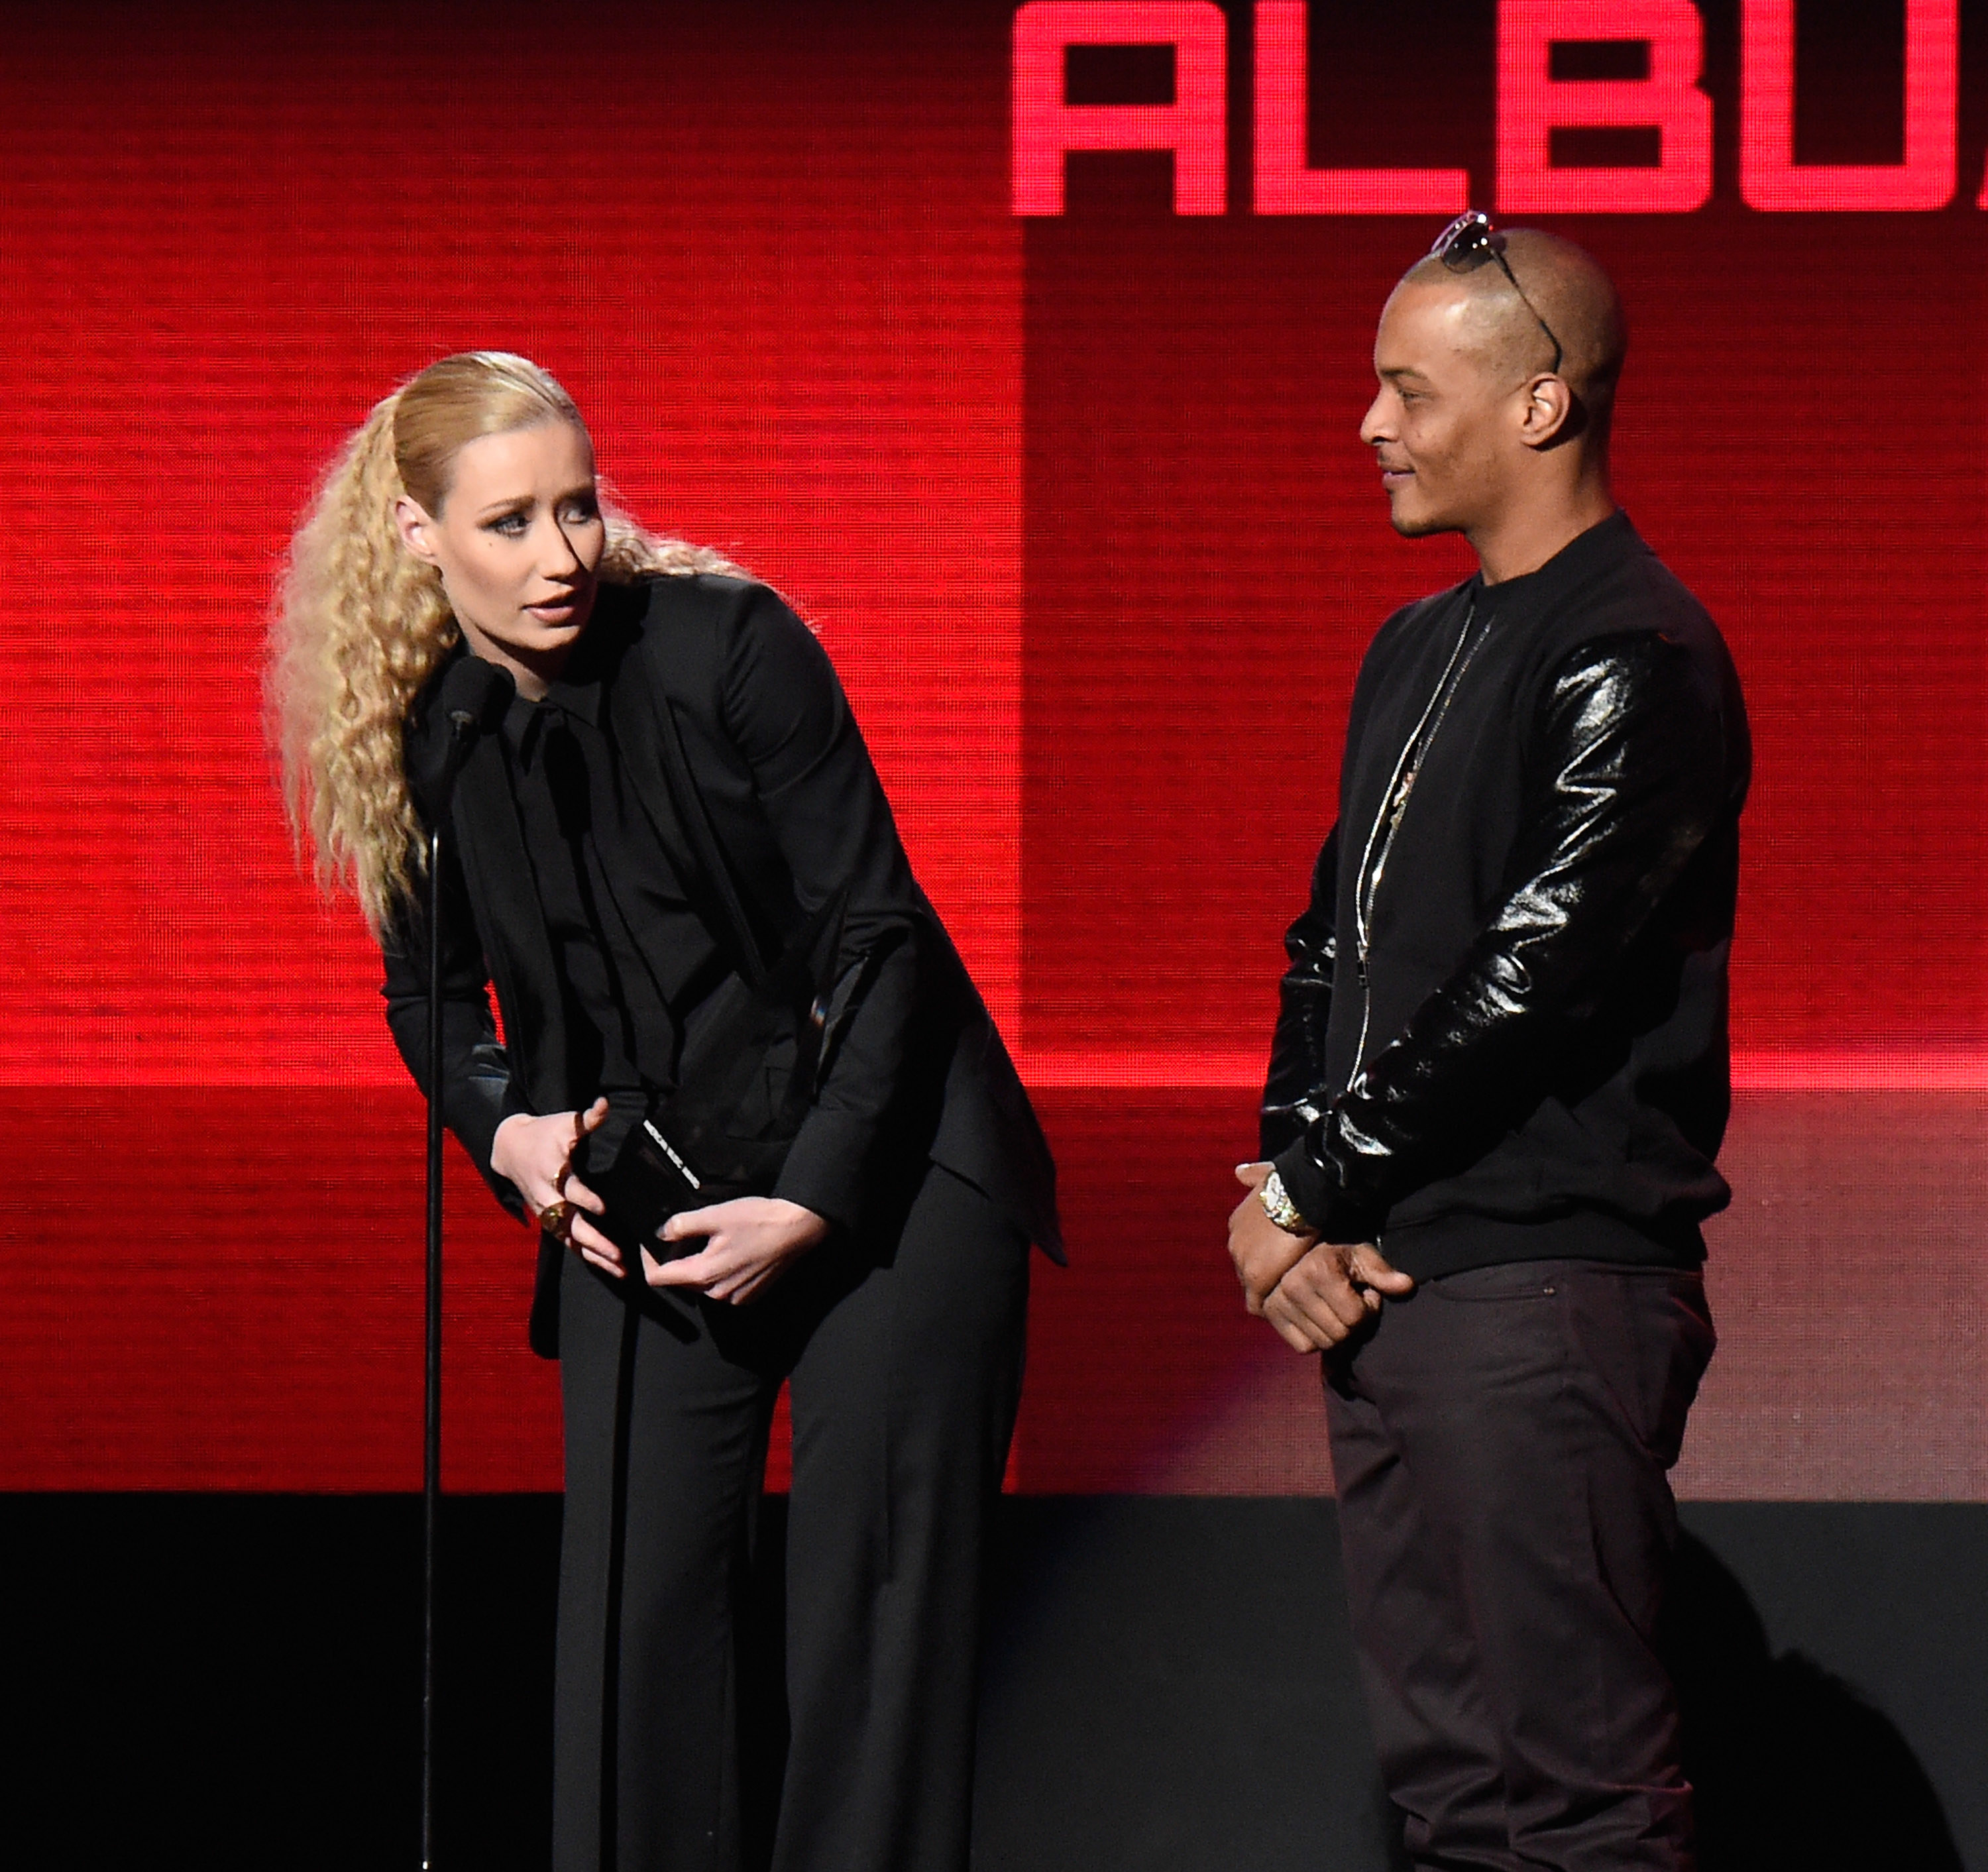 Iggy Azalea and T.i. accept award onstage at the 2014 American Music Awards